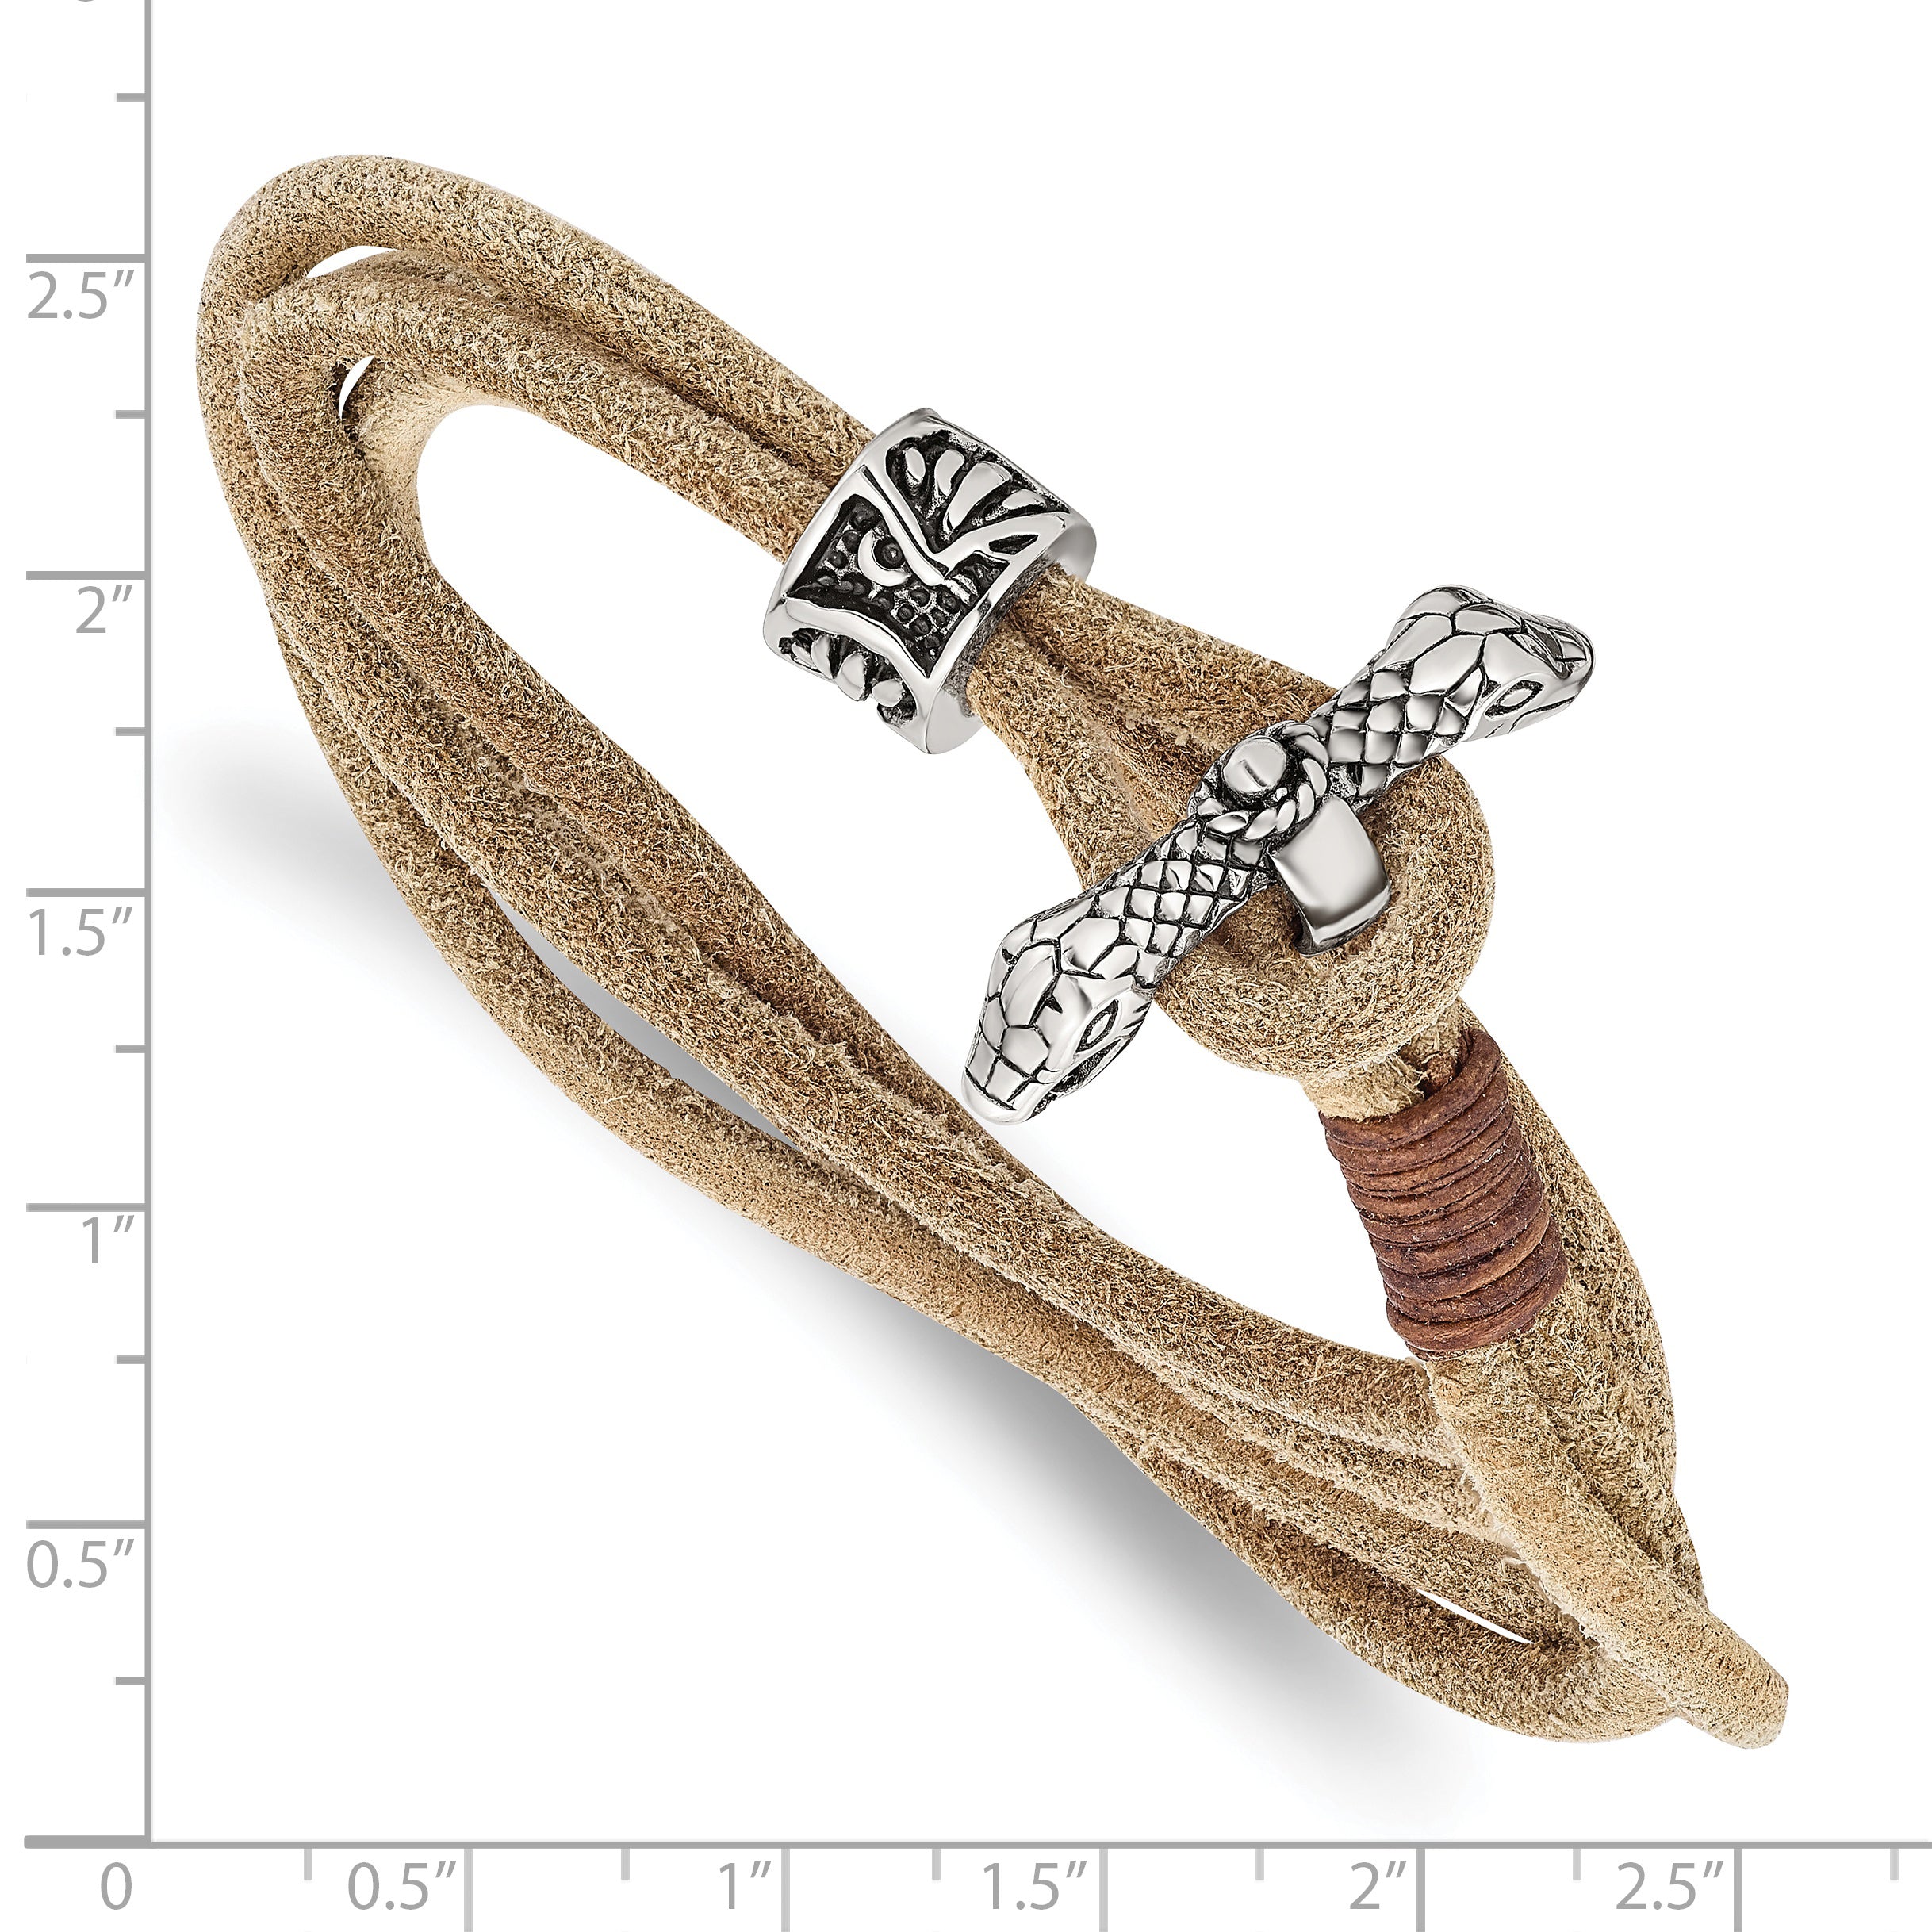 Chisel Stainless Steel Antiqued and Polished Snake Heads Tan Leather 16 inch Wrap Bracelet